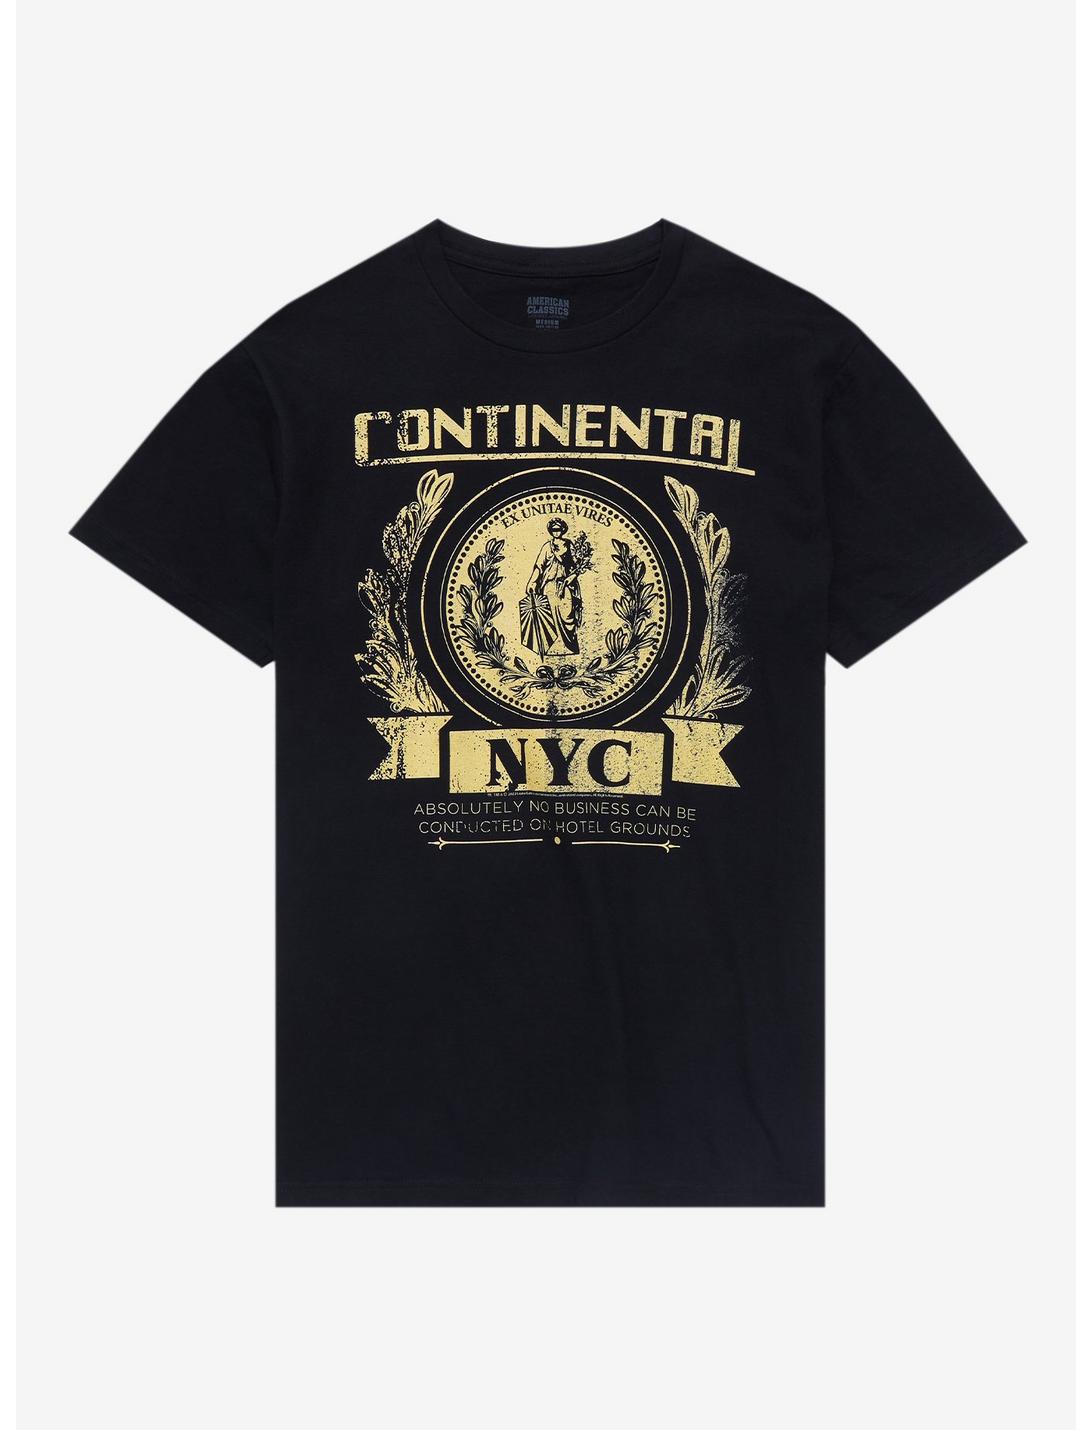 John Wick Continental T-Shirt - BoxLunch Exclusive, NAVY, hi-res